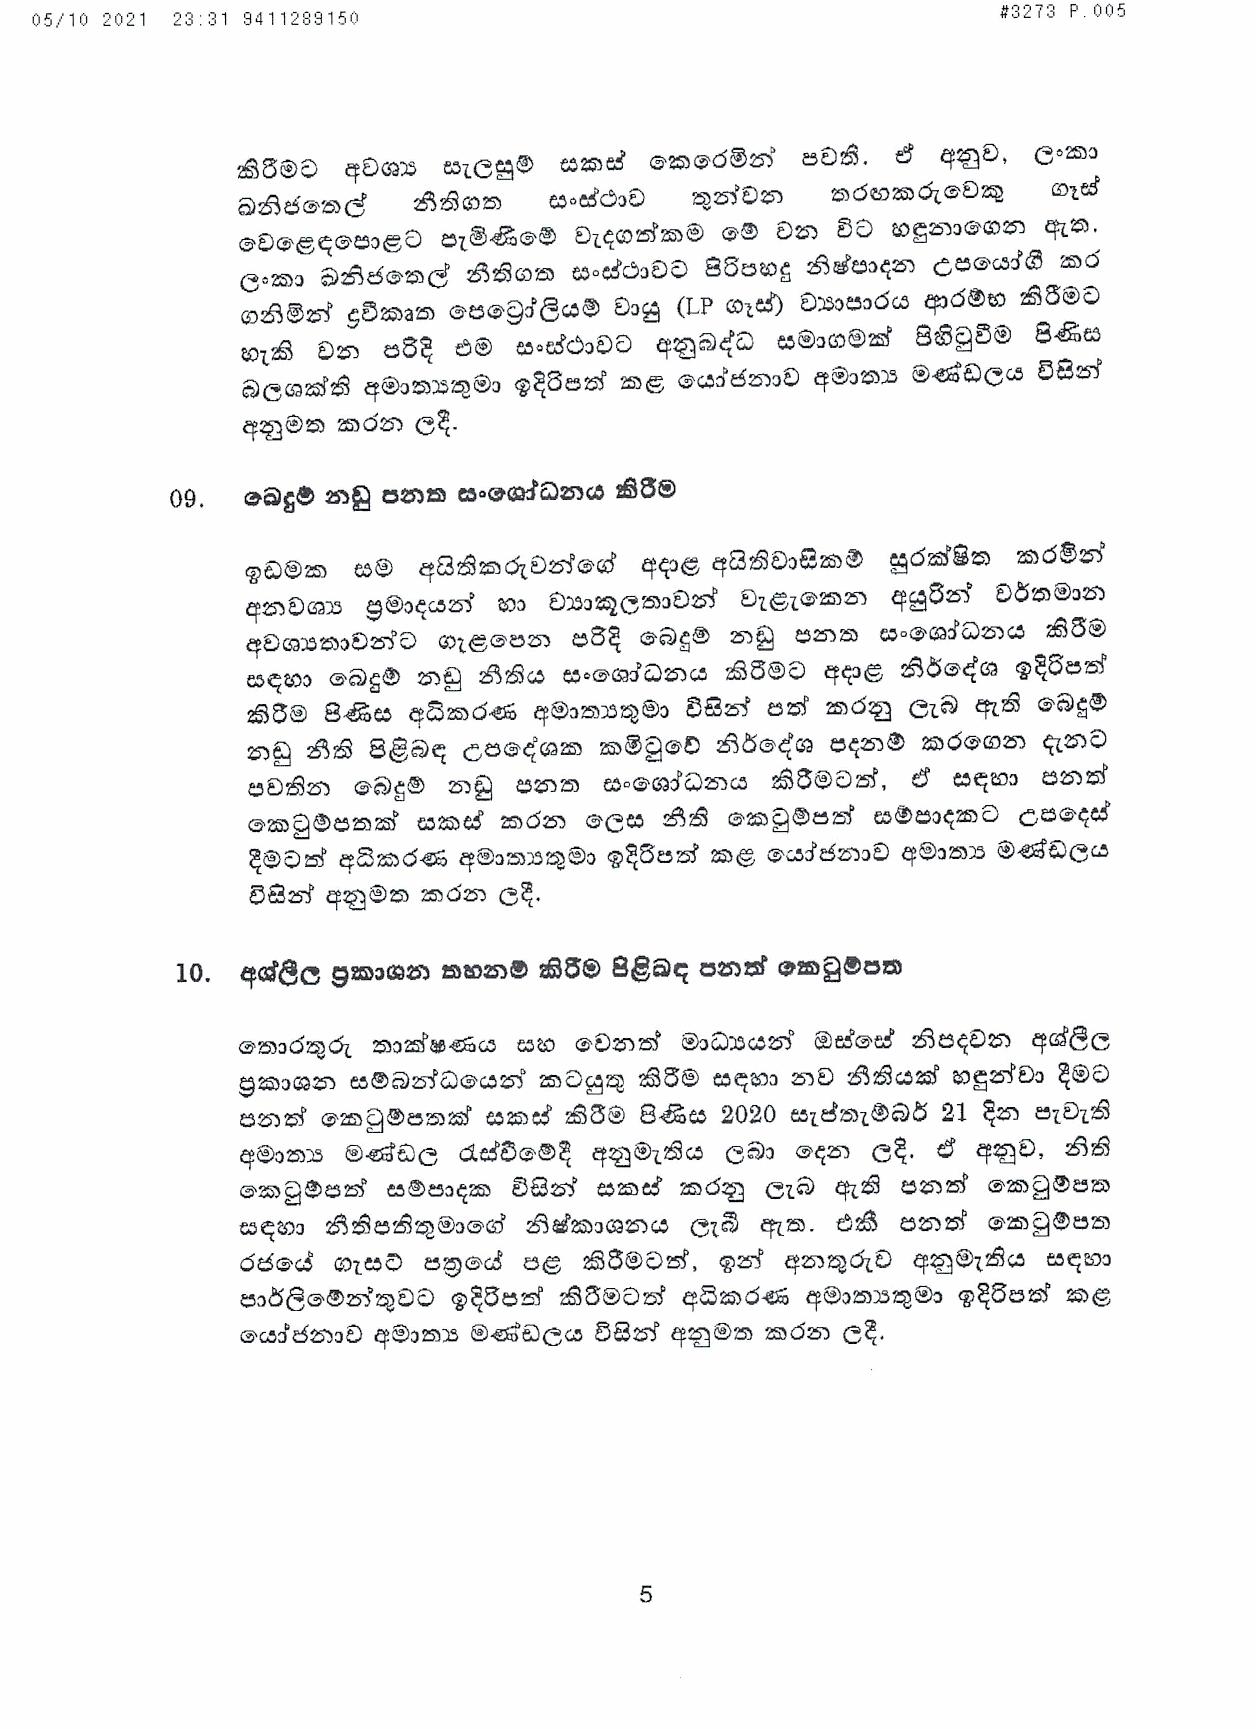 Cabinet Decision on 05.10.2021 page 005